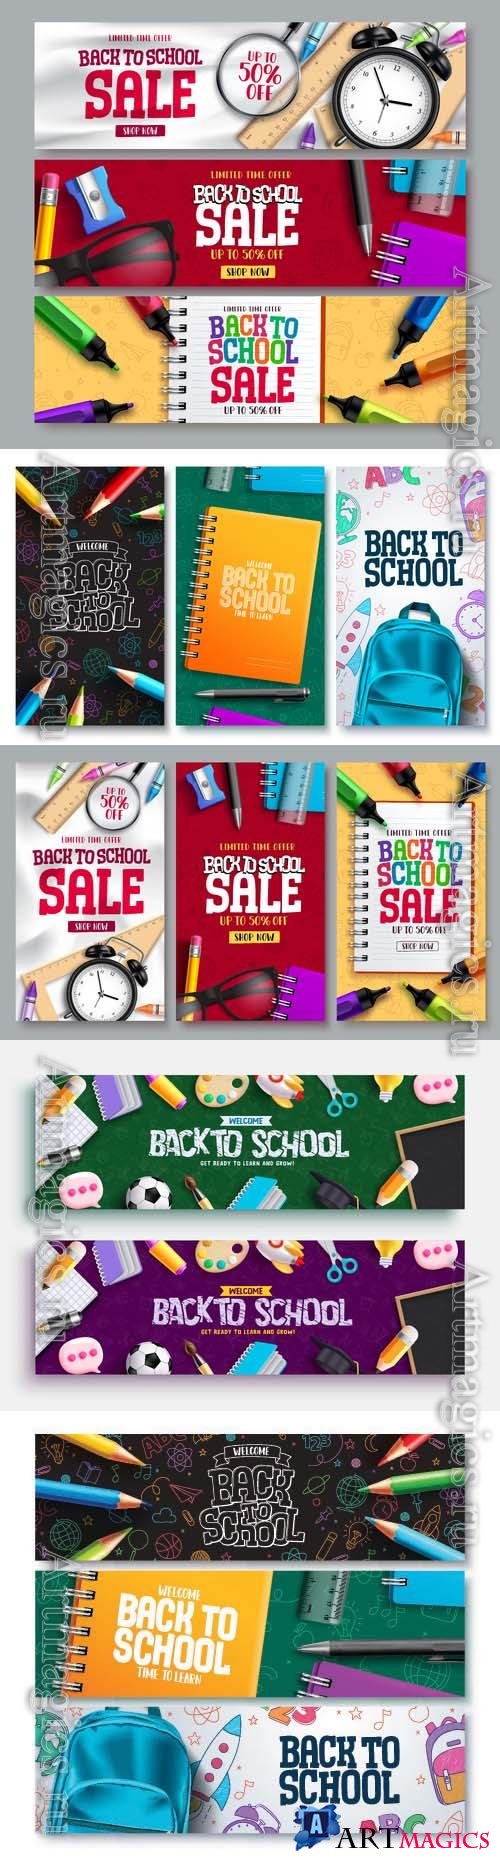 Back to school vector banner set design, back to school greeting text with kids educational